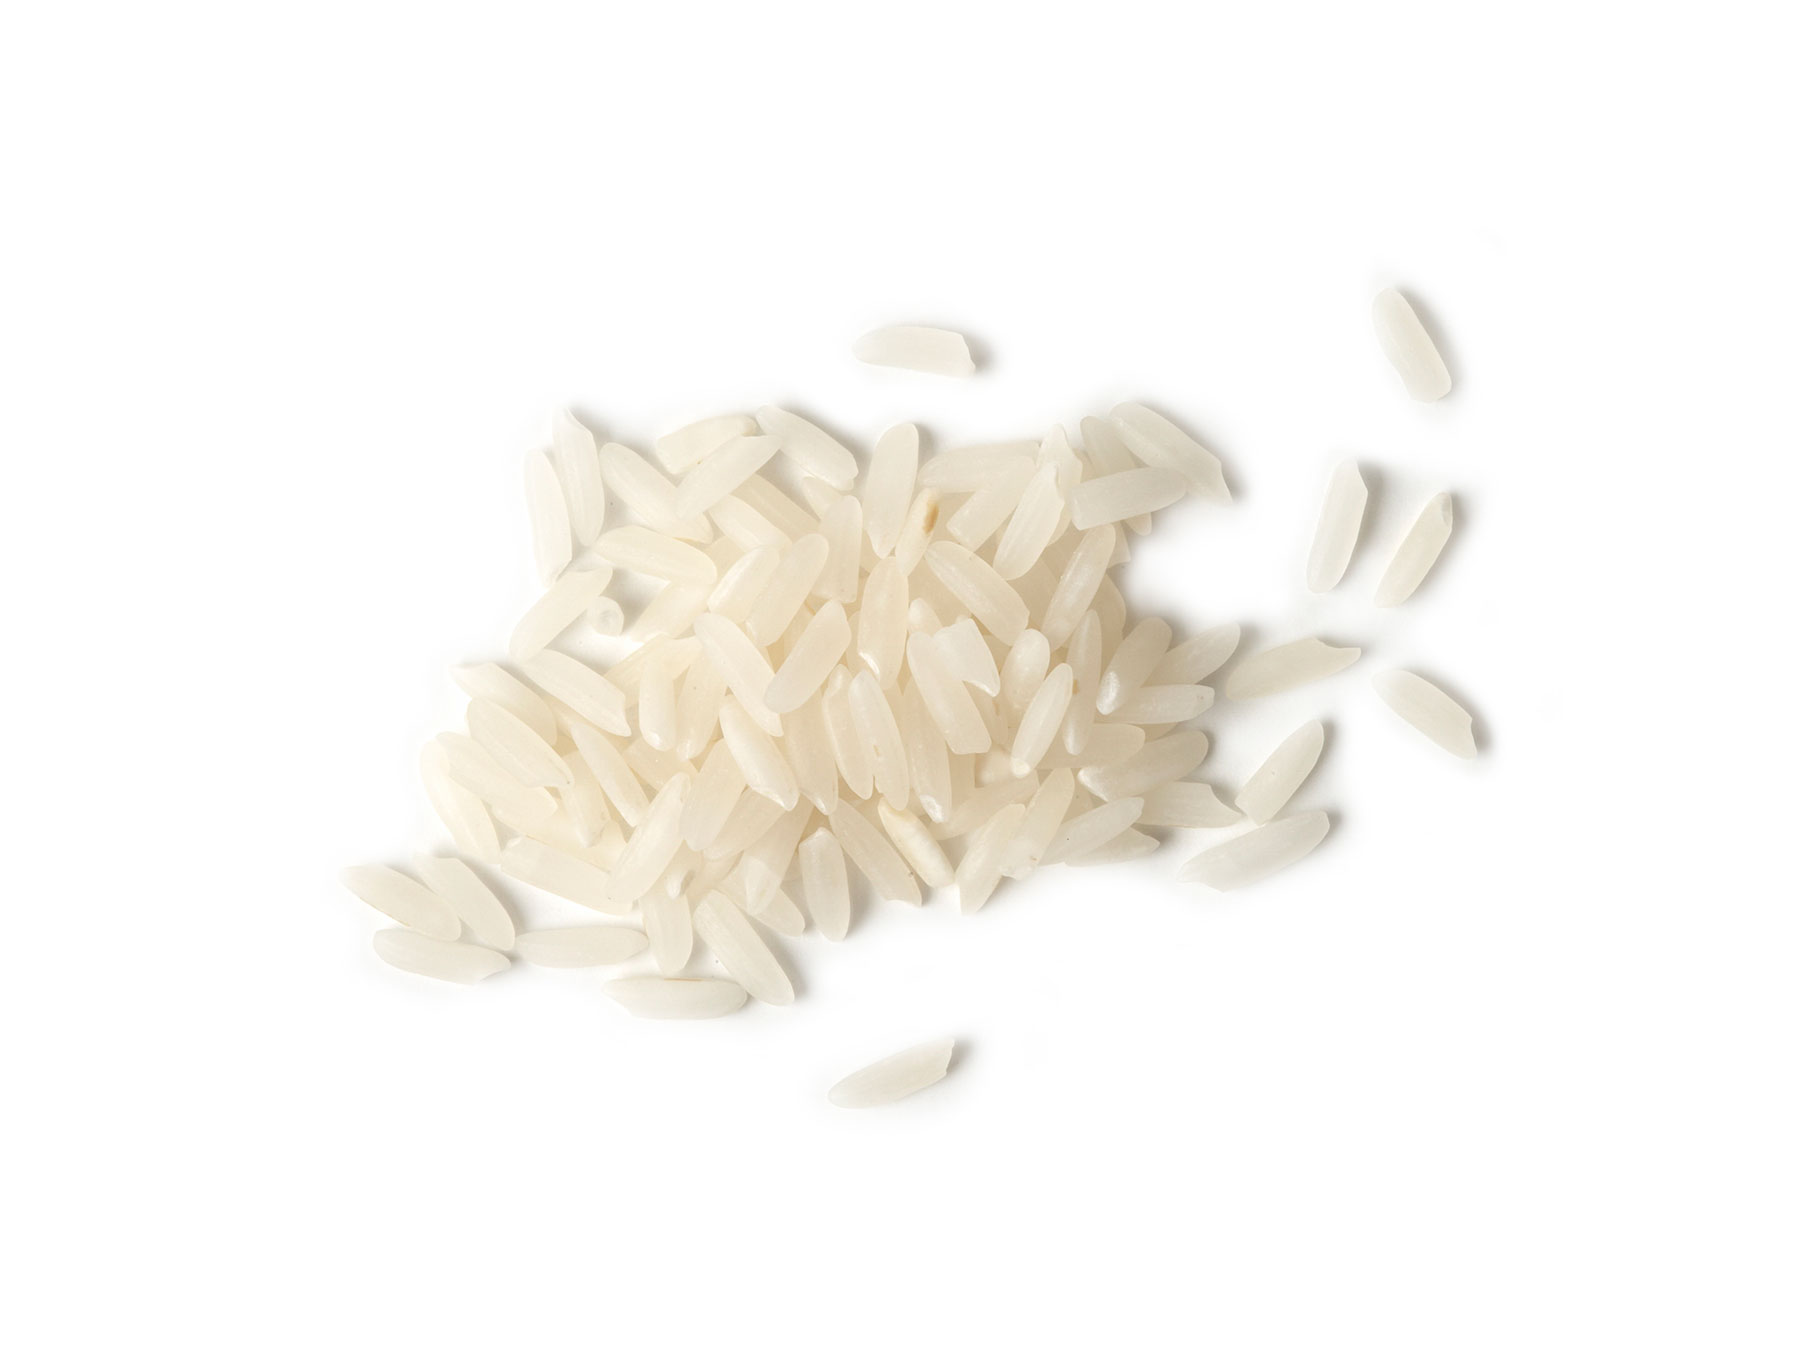 Overhead view of uncooked white rice grains.